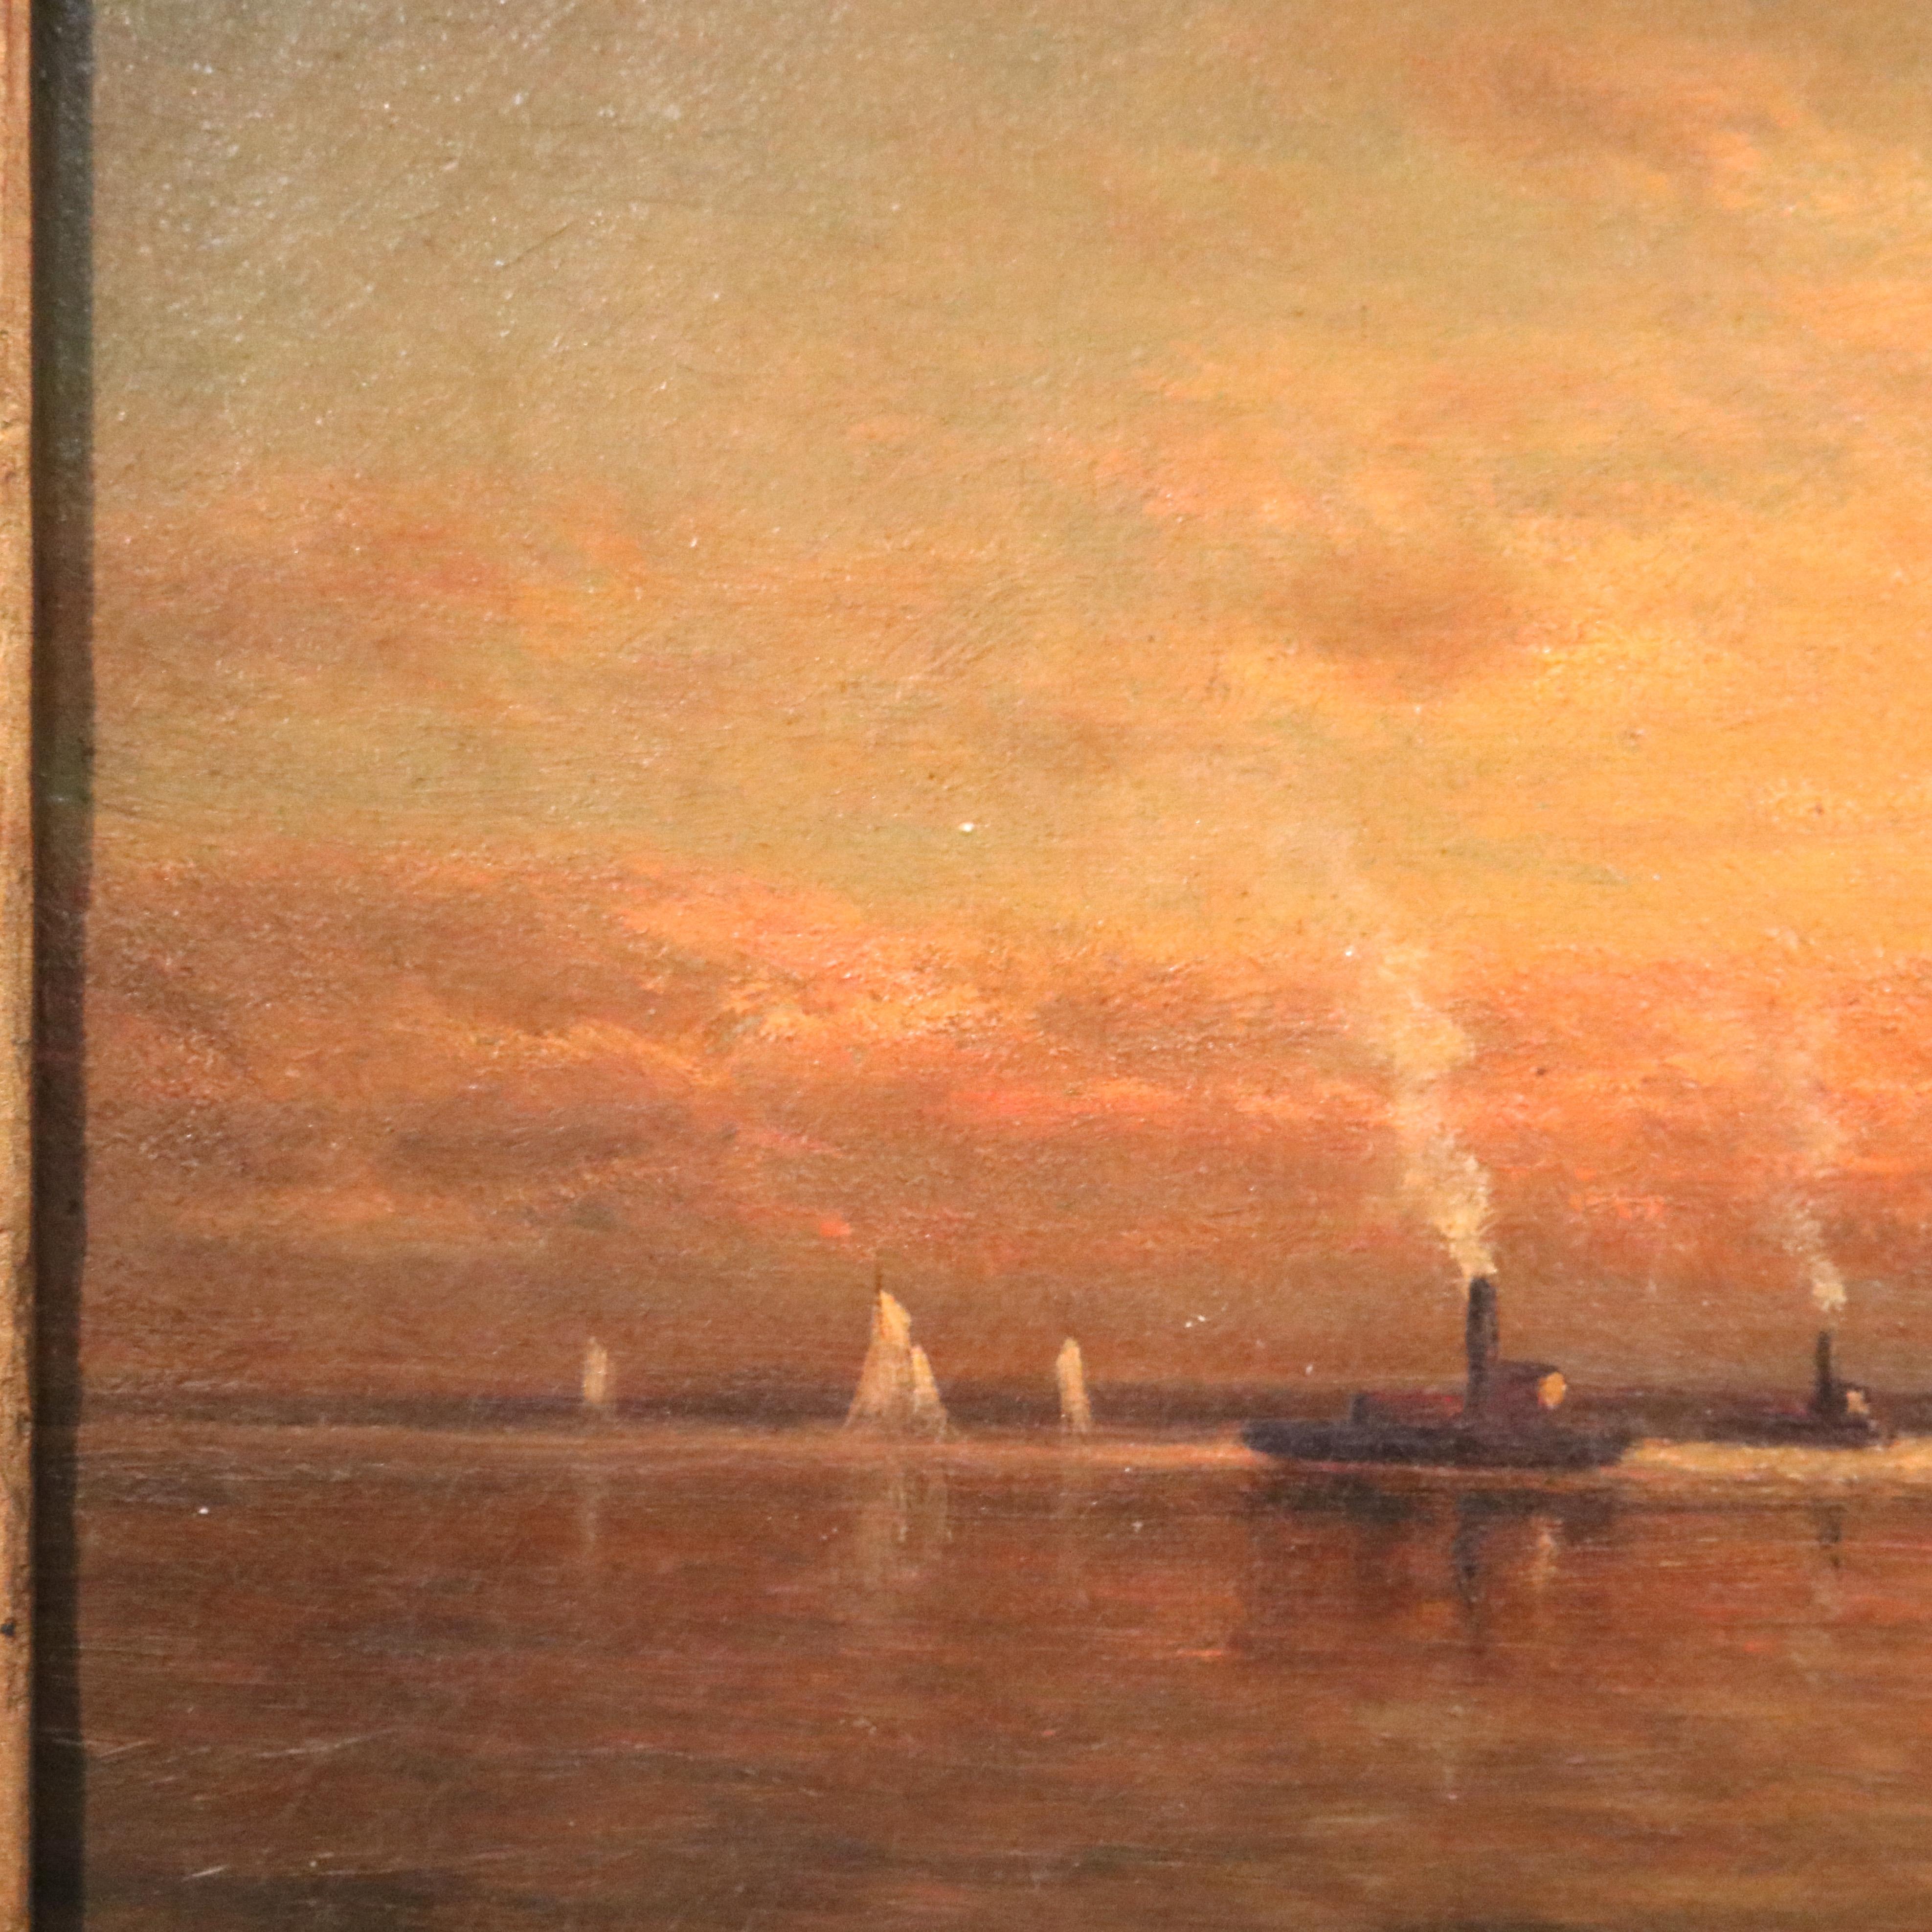 Antique Nautical Seascape Painting with Sailboats & Steam Ships, c1880 1